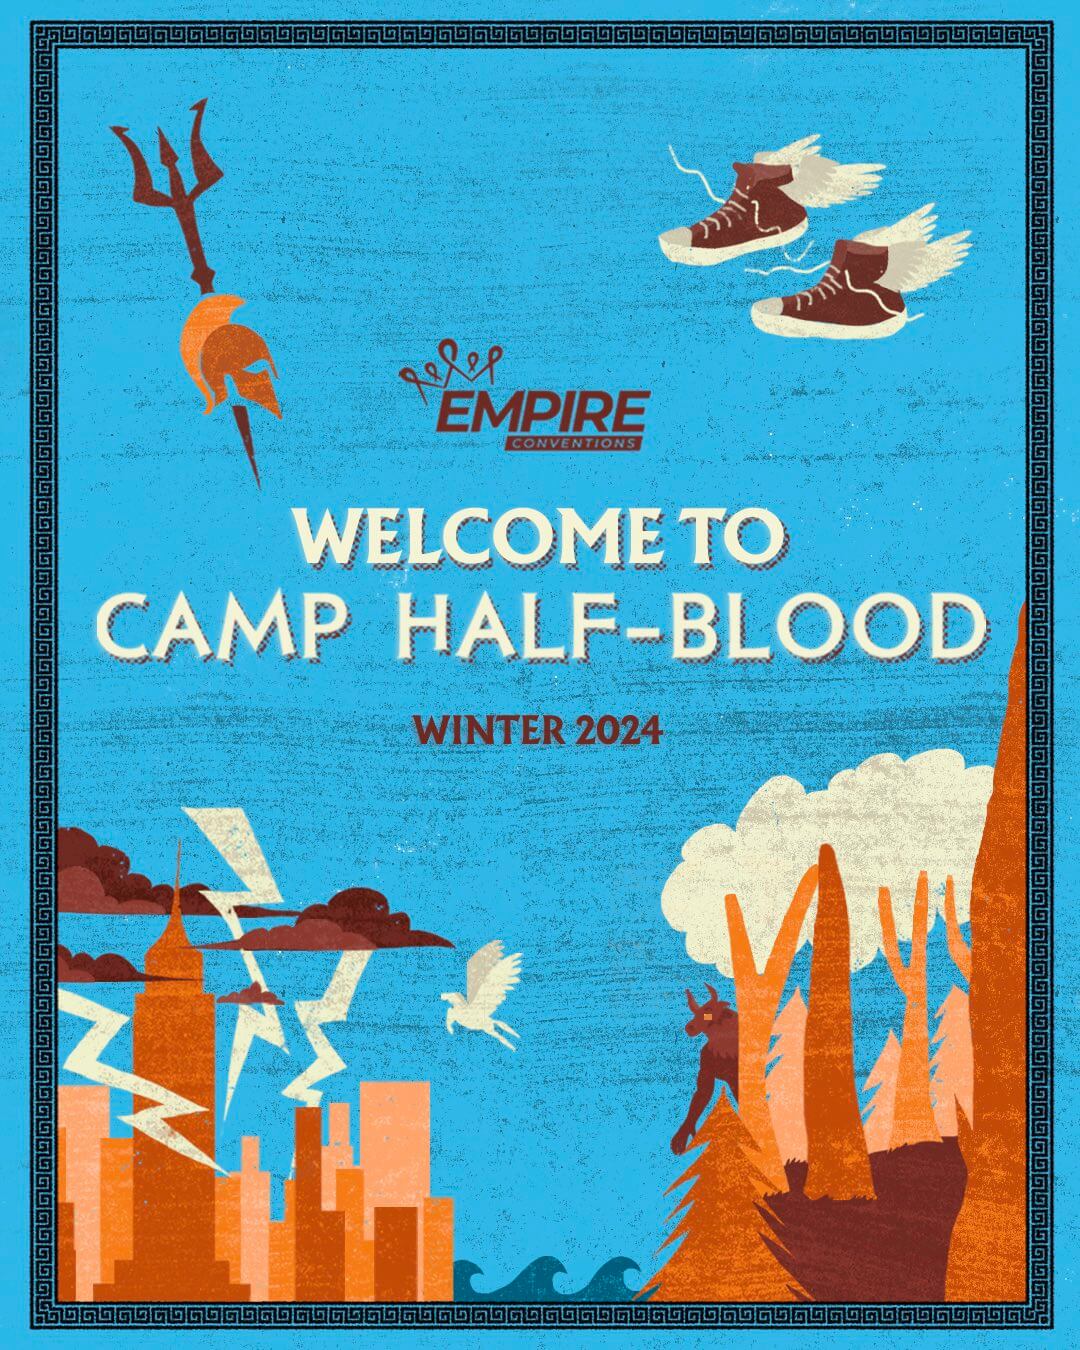 Welcome to Camp Half-Blood